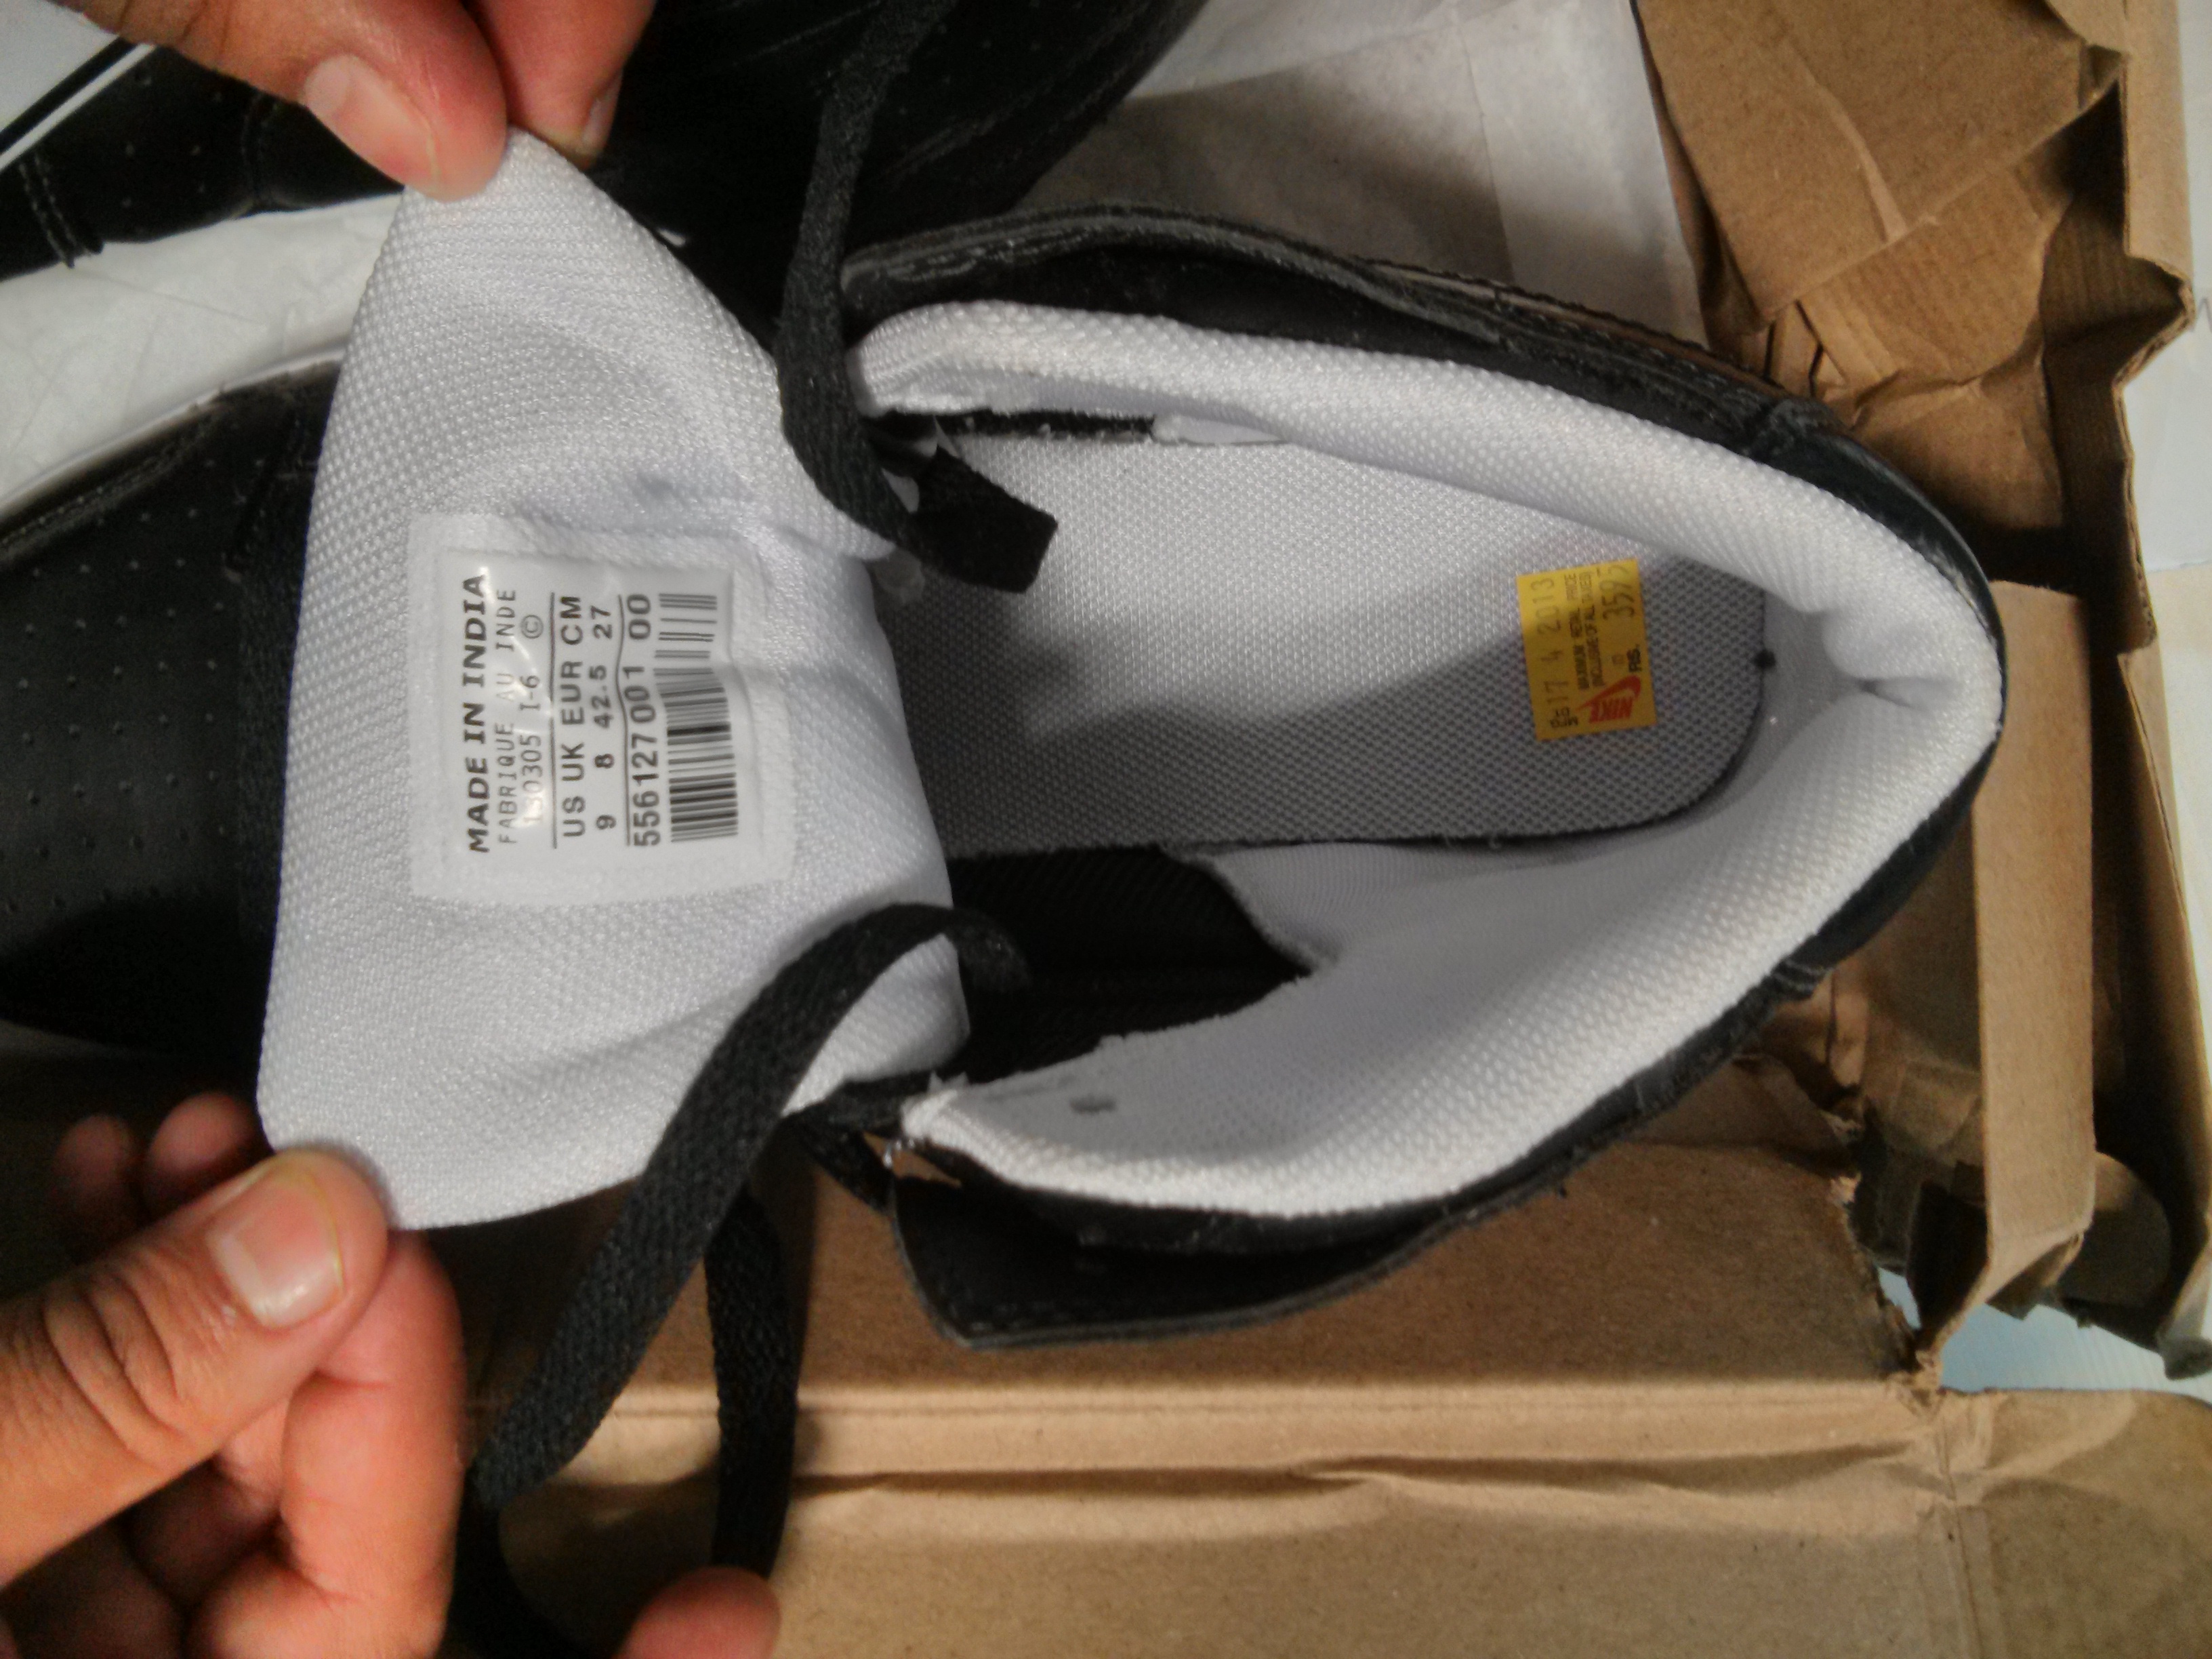 Fake Nike Shoes from Myntra | A 